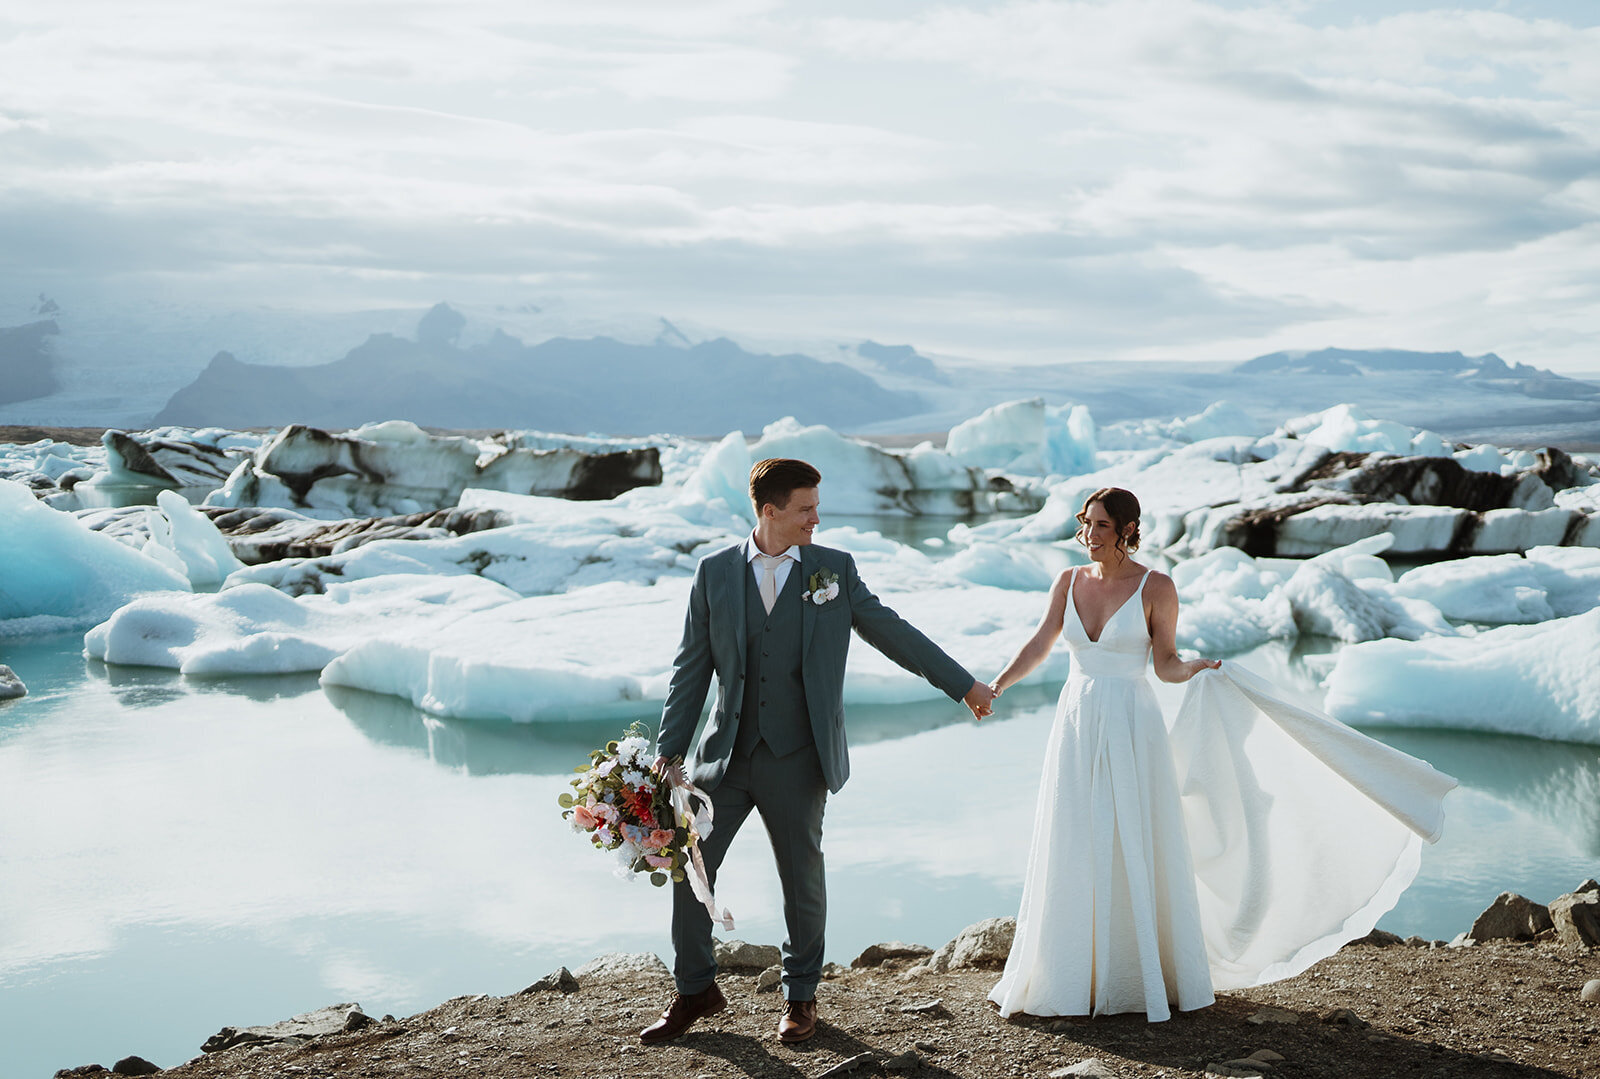 This Iceland adventure elopement was one for the books! Jess wore a stunning mountain elopement dress and looked incredible in the elopement photos! See tons of outdoor elopement outfit, elopement mountains, bride and groom poses, and romantic elopement wedding dress. Book Sydney for your romantic elopement day or intimate Iceland elopement